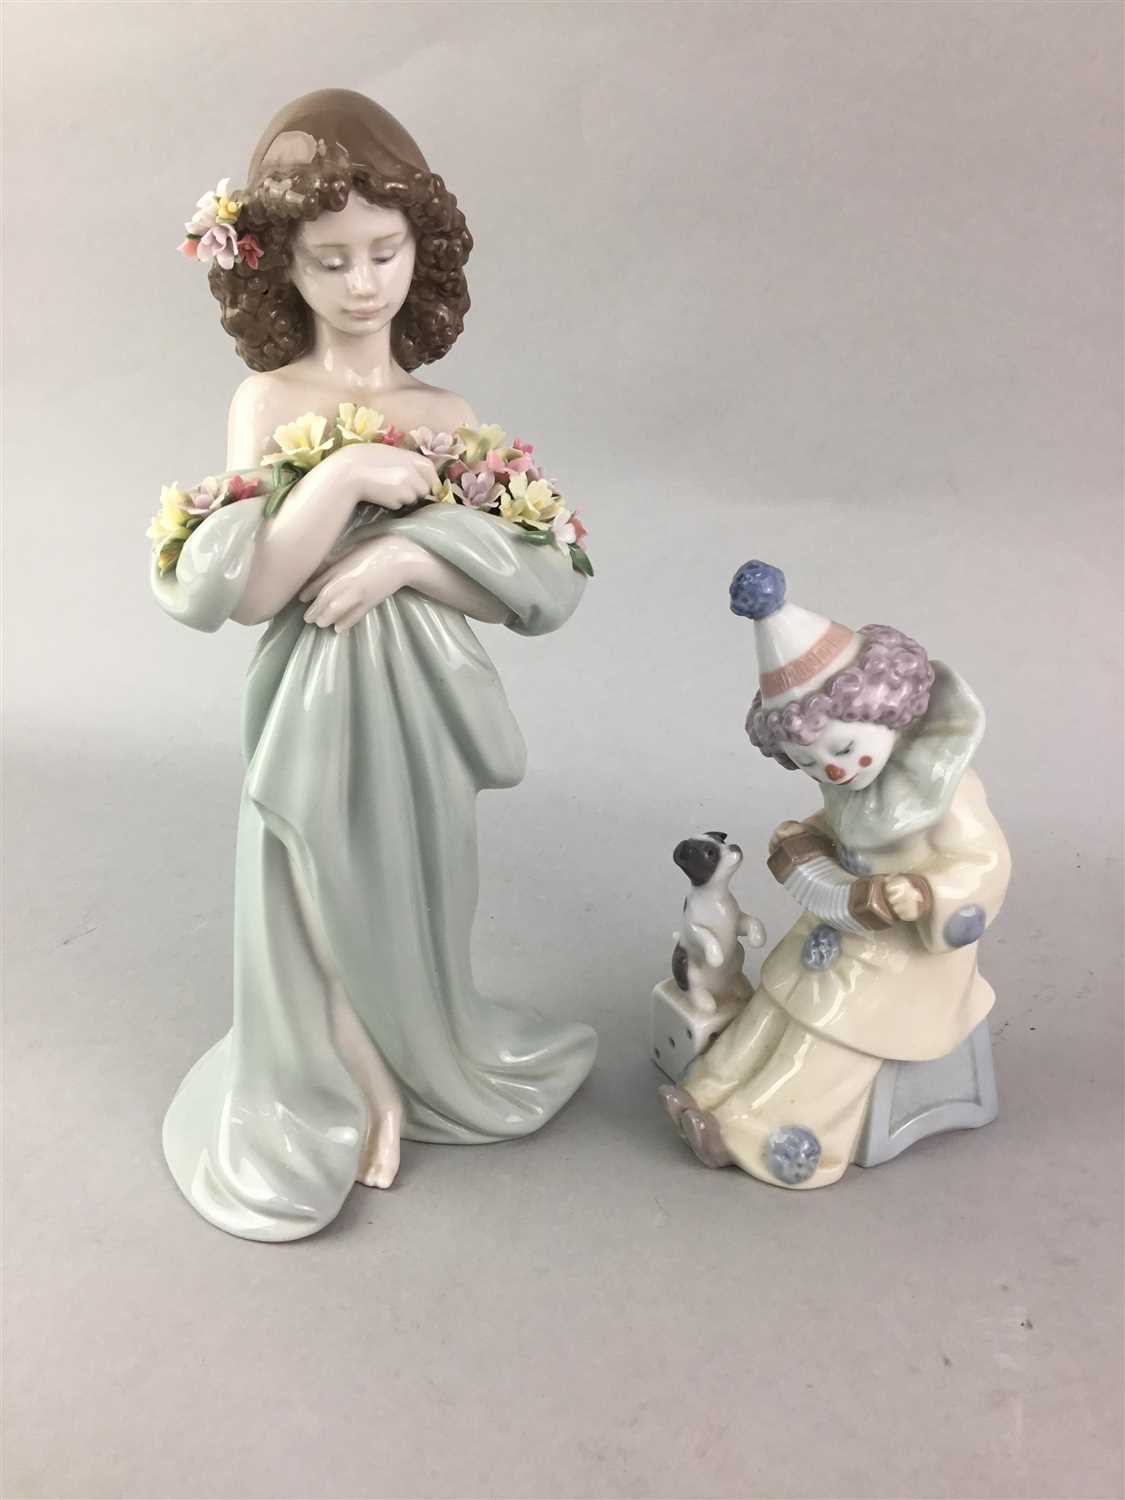 Lot 310 - A LLADRO FIGURE OF 'PETALS OF LOVE' AND ANOTHER LLADRO FIGURE